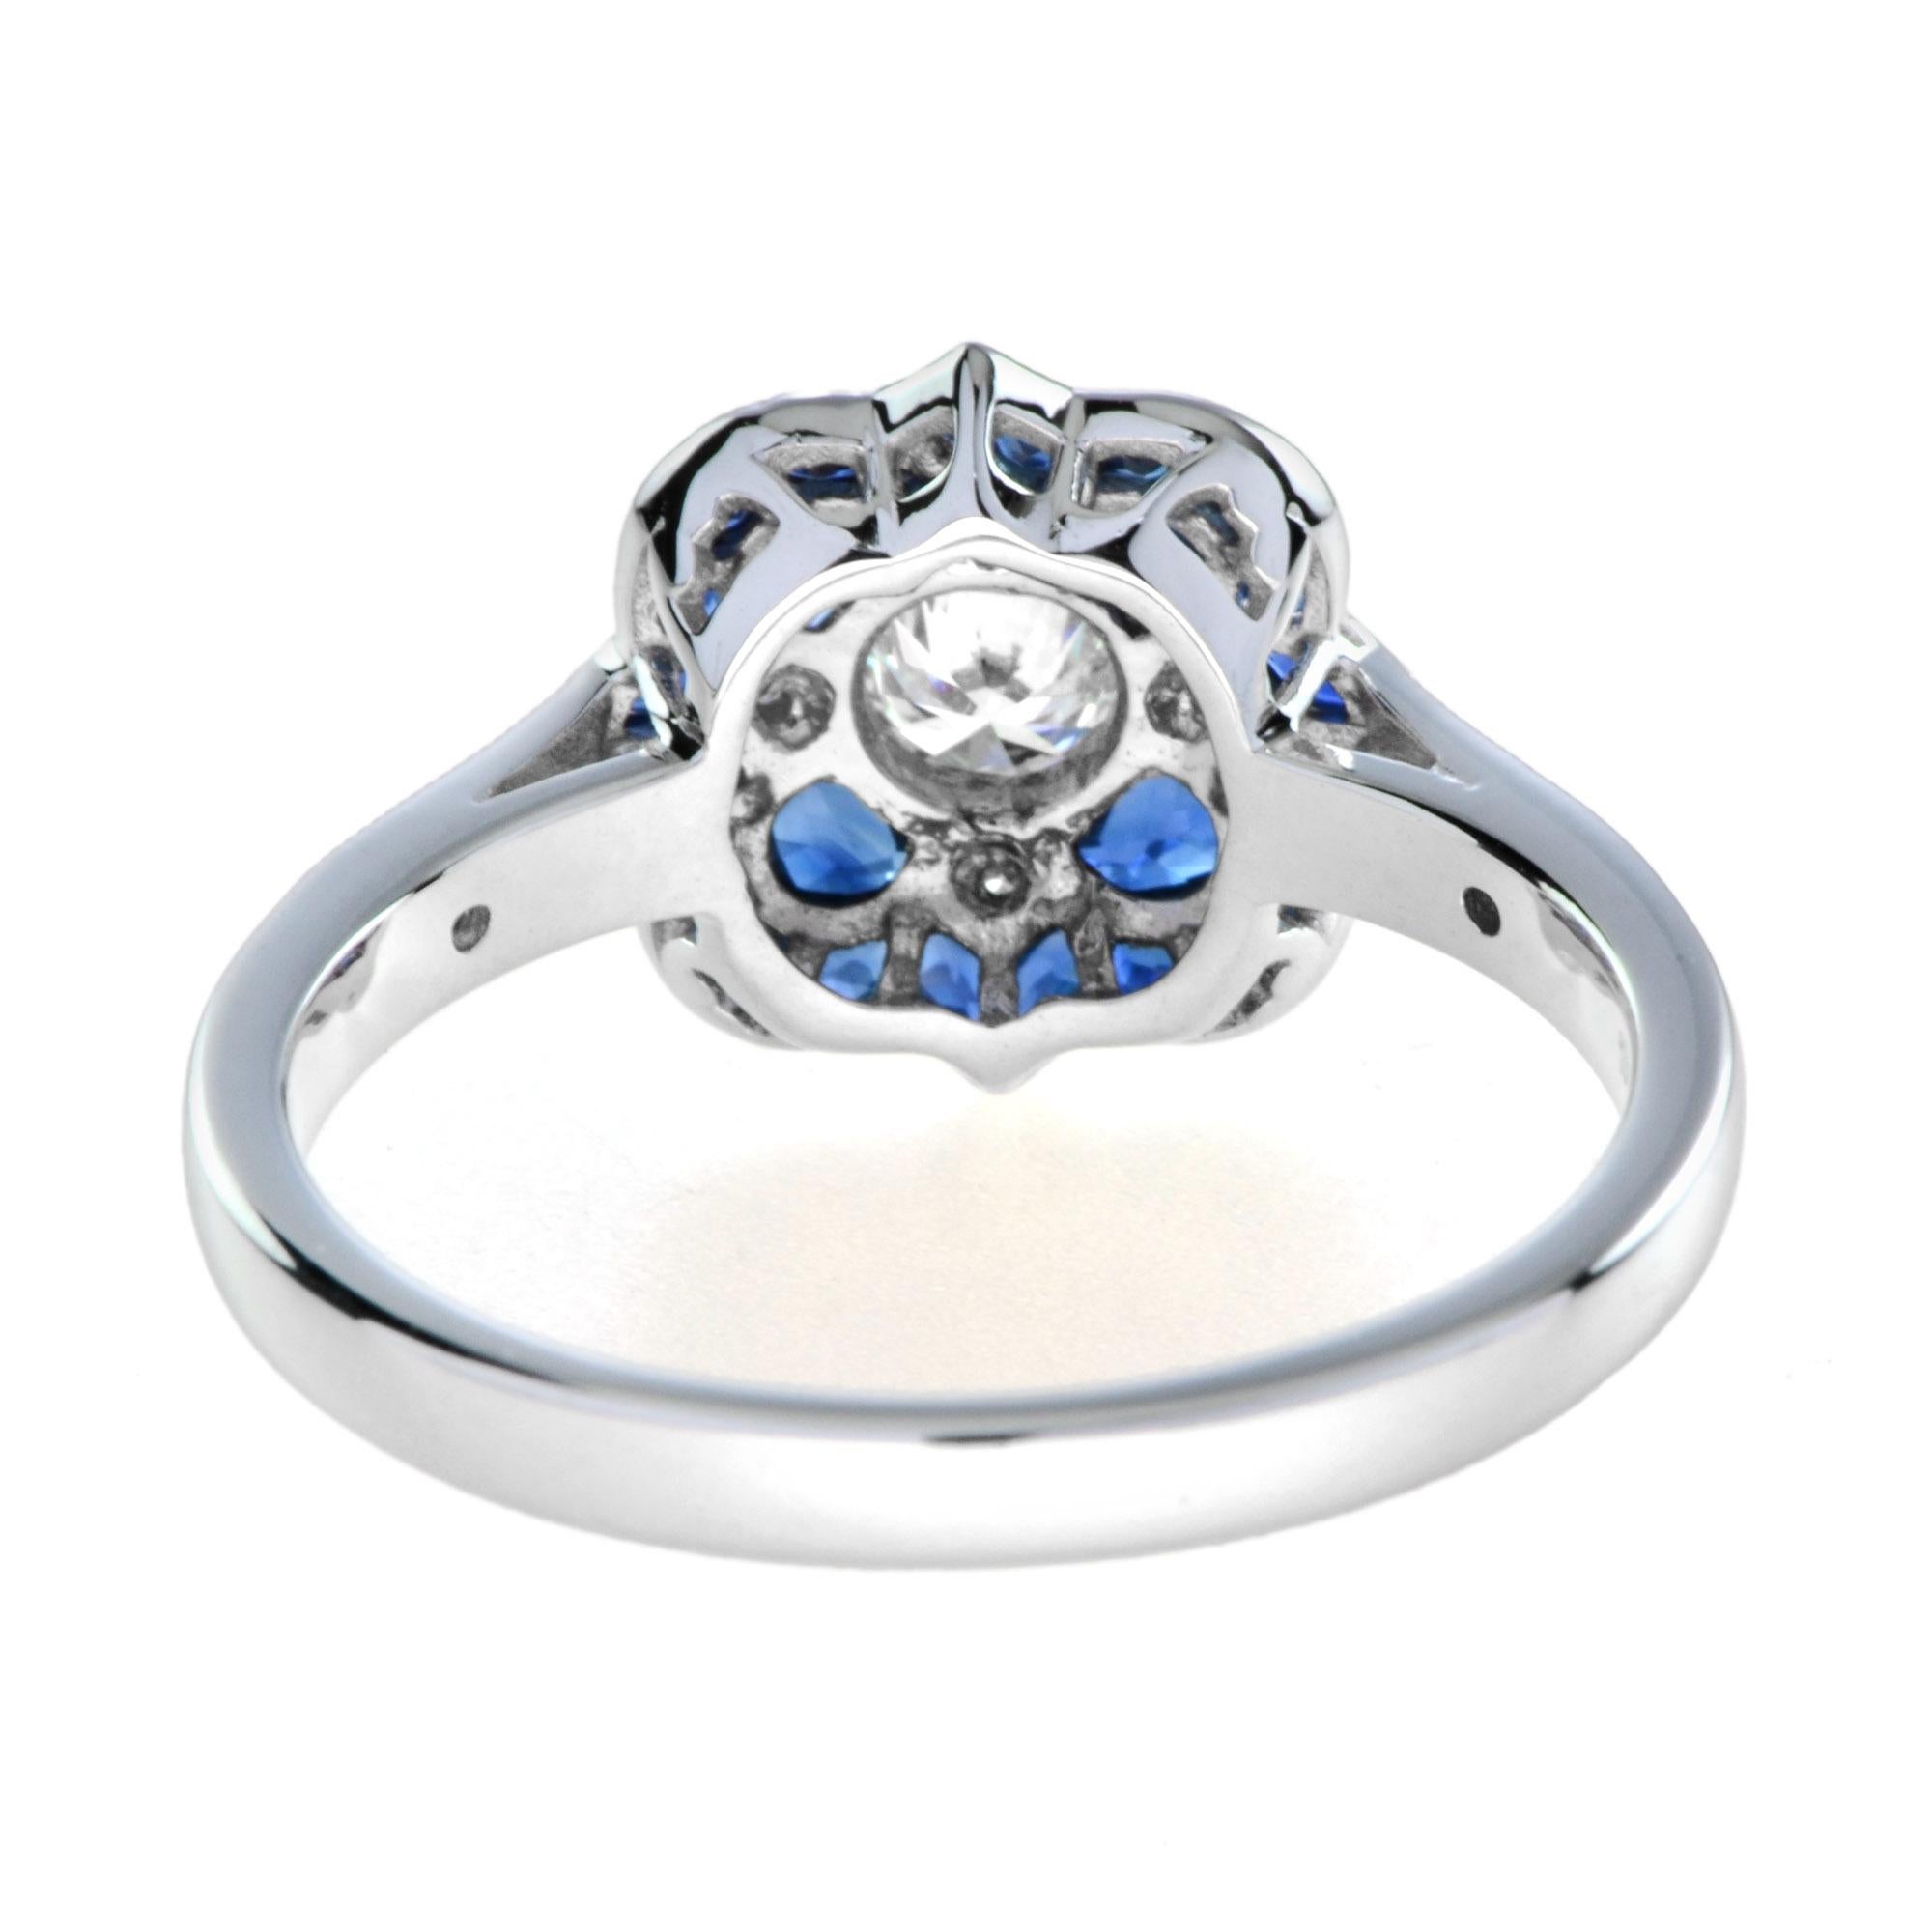 For Sale:  Art Deco Style Diamond and Sapphire Ring in 18K White Gold 7